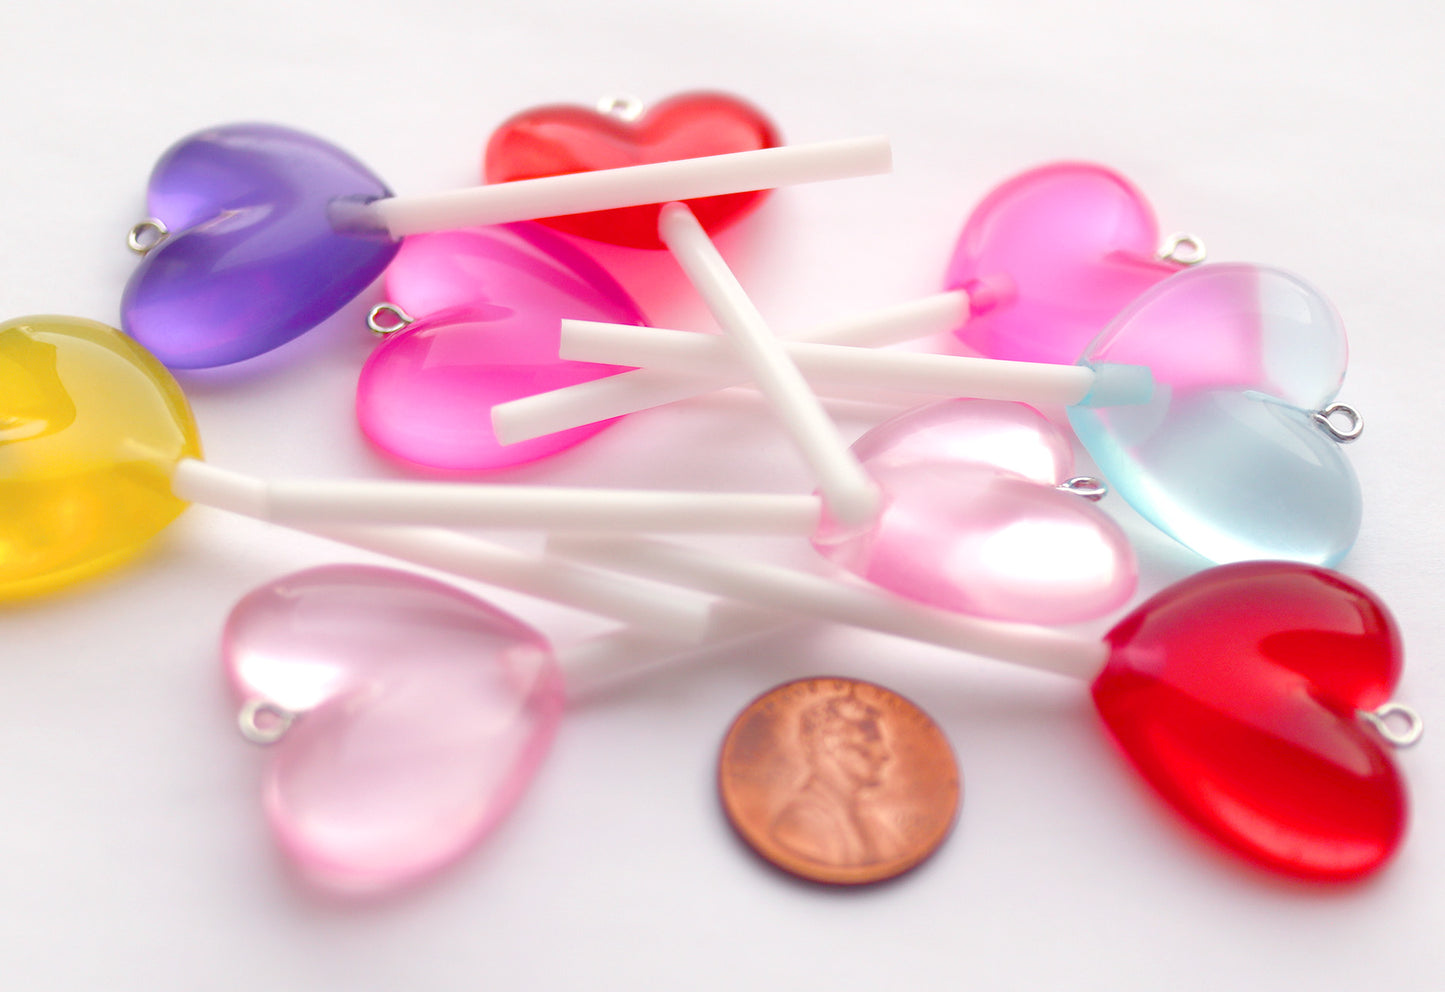 Heart Lollipop Charms - 70mm Big Translucent Heart Shaped Fake Candy Acrylic or Resin Charms - 6 pc set